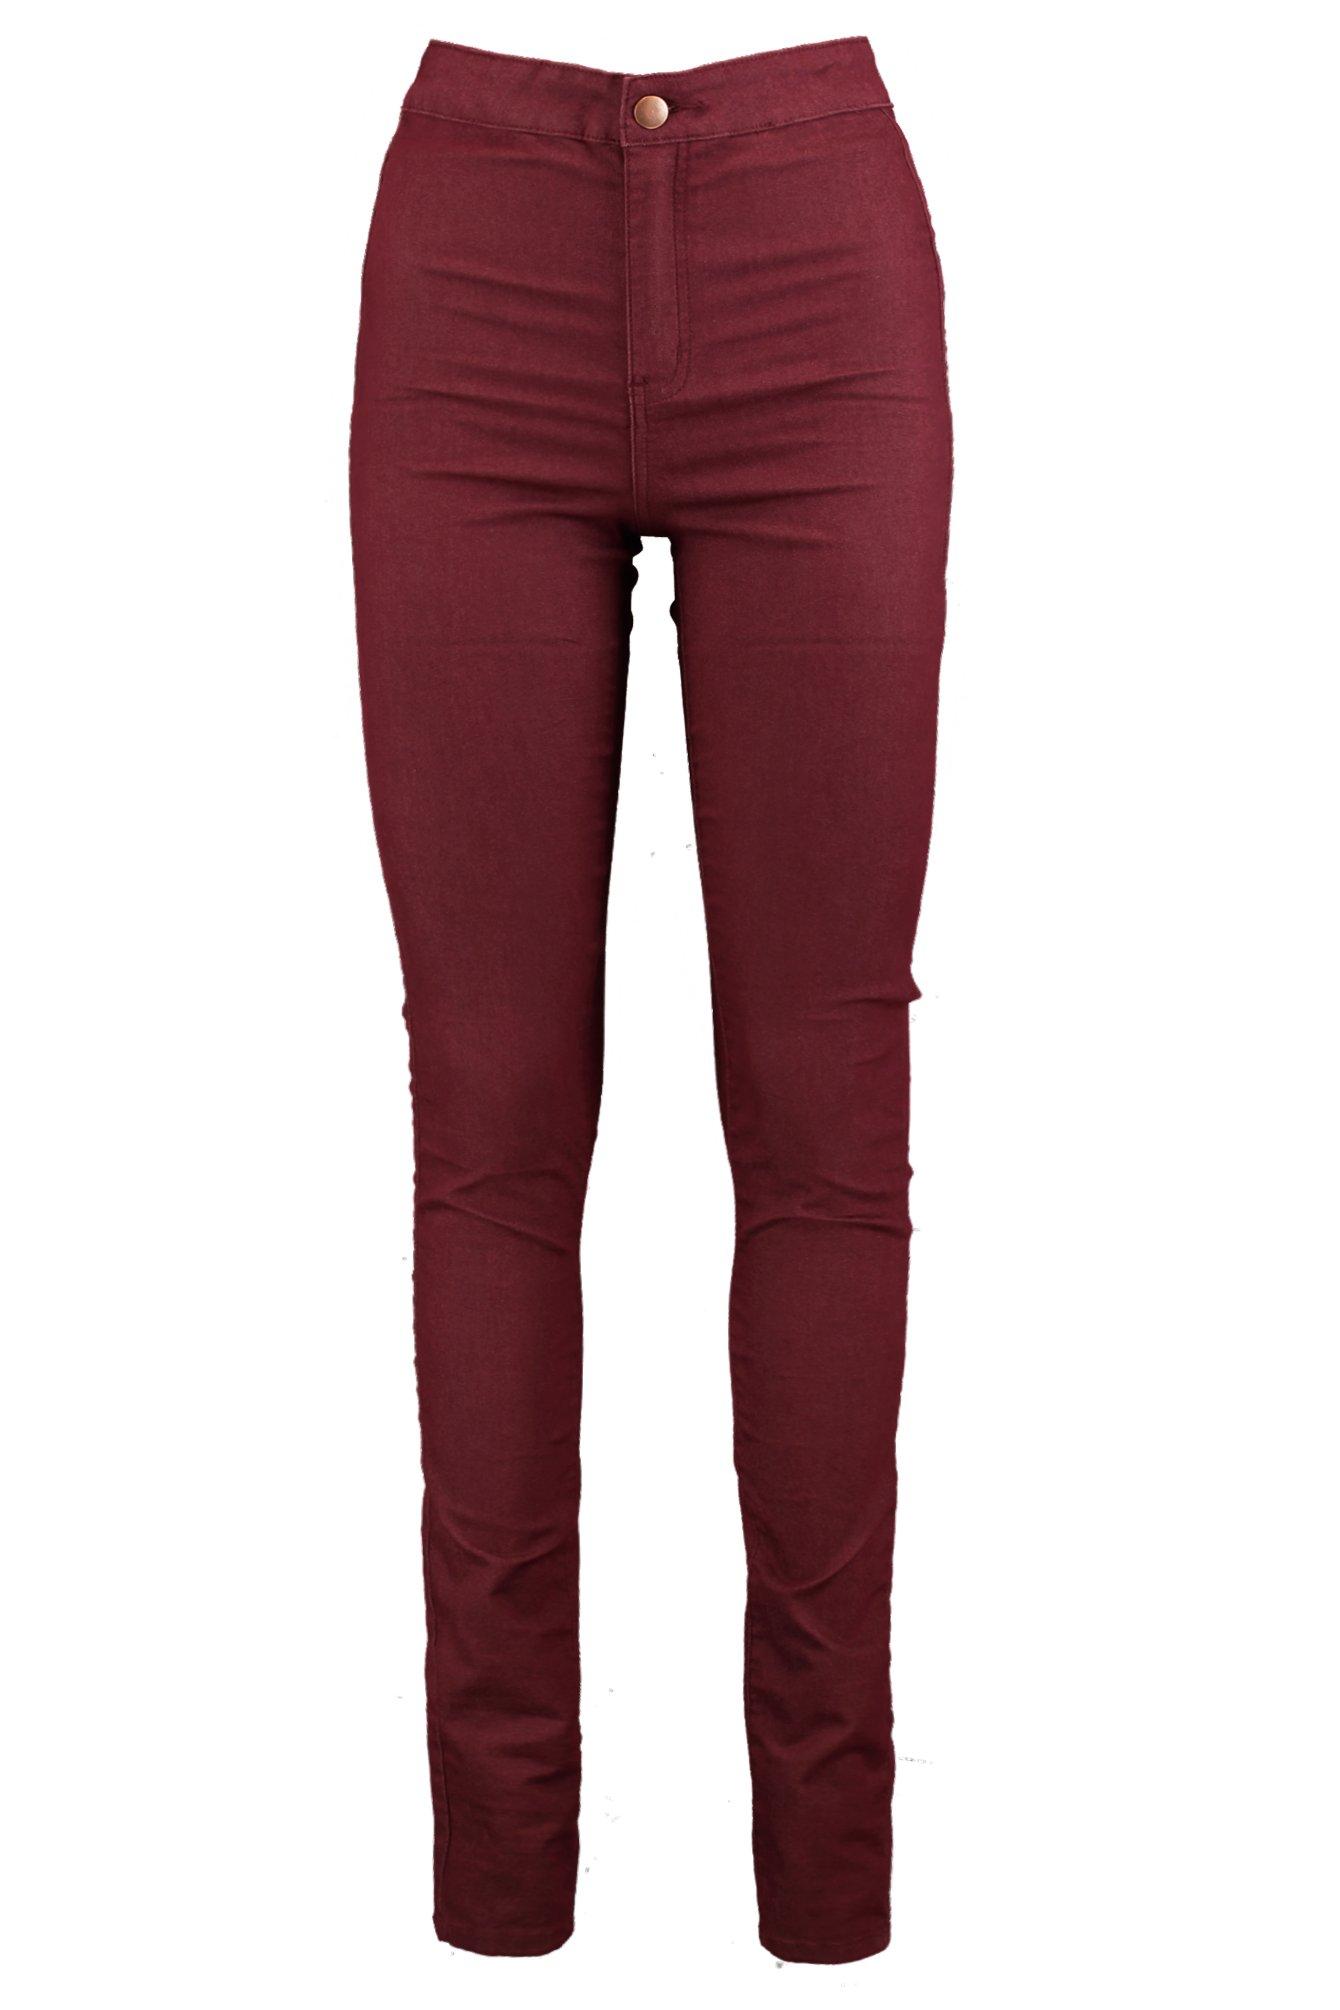 red jeans tall